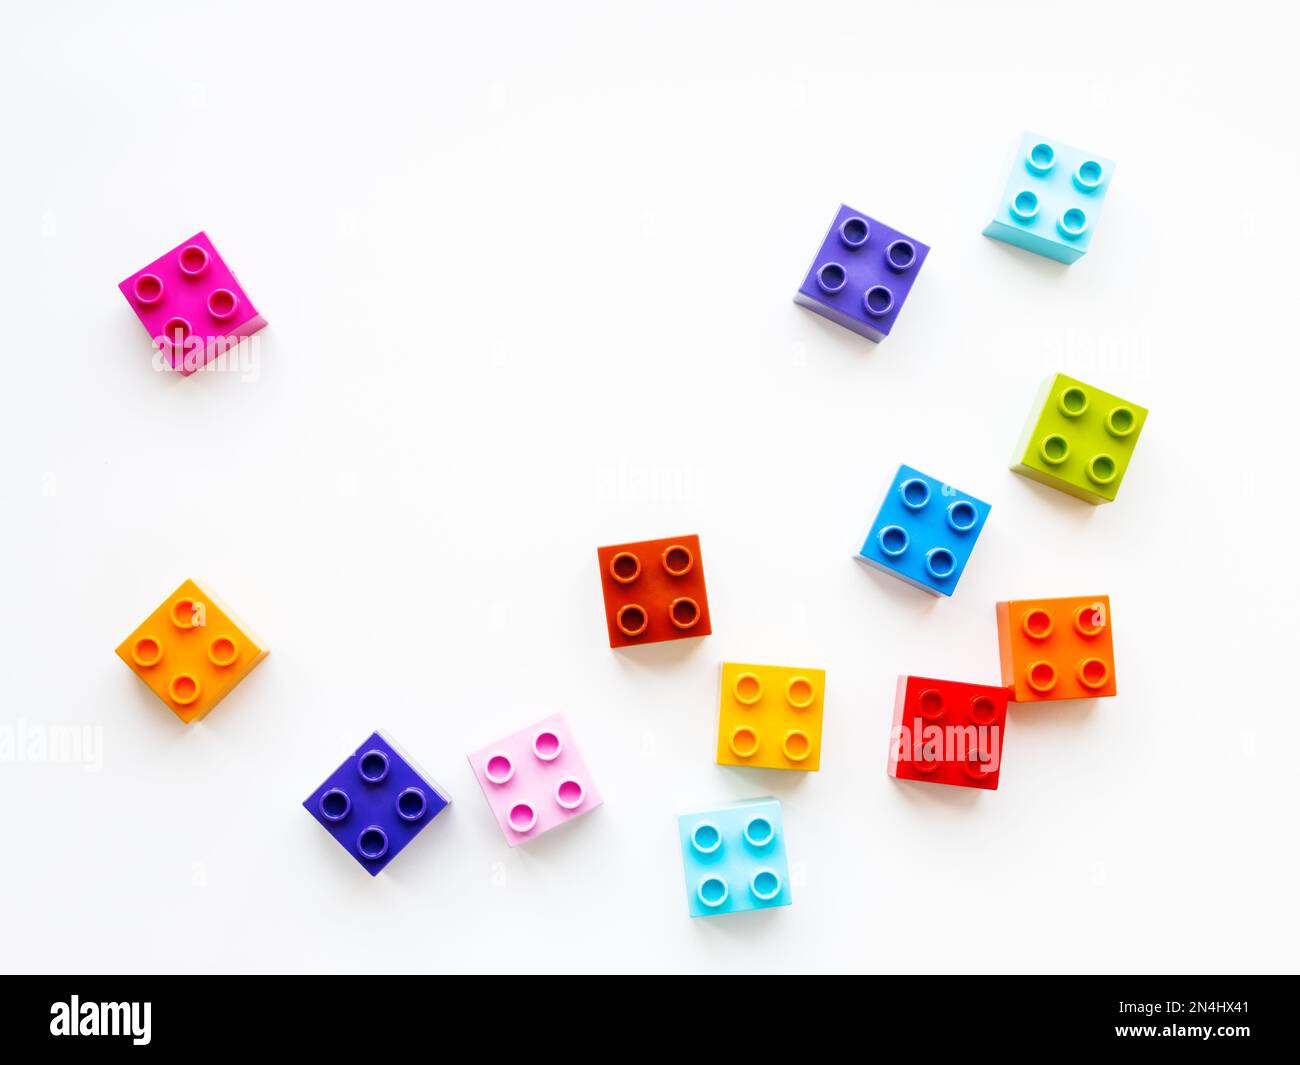 Colorful constructor blocks. Toy bricks lyingwithout order. Place for text among multicolored toy details. Stock Photo